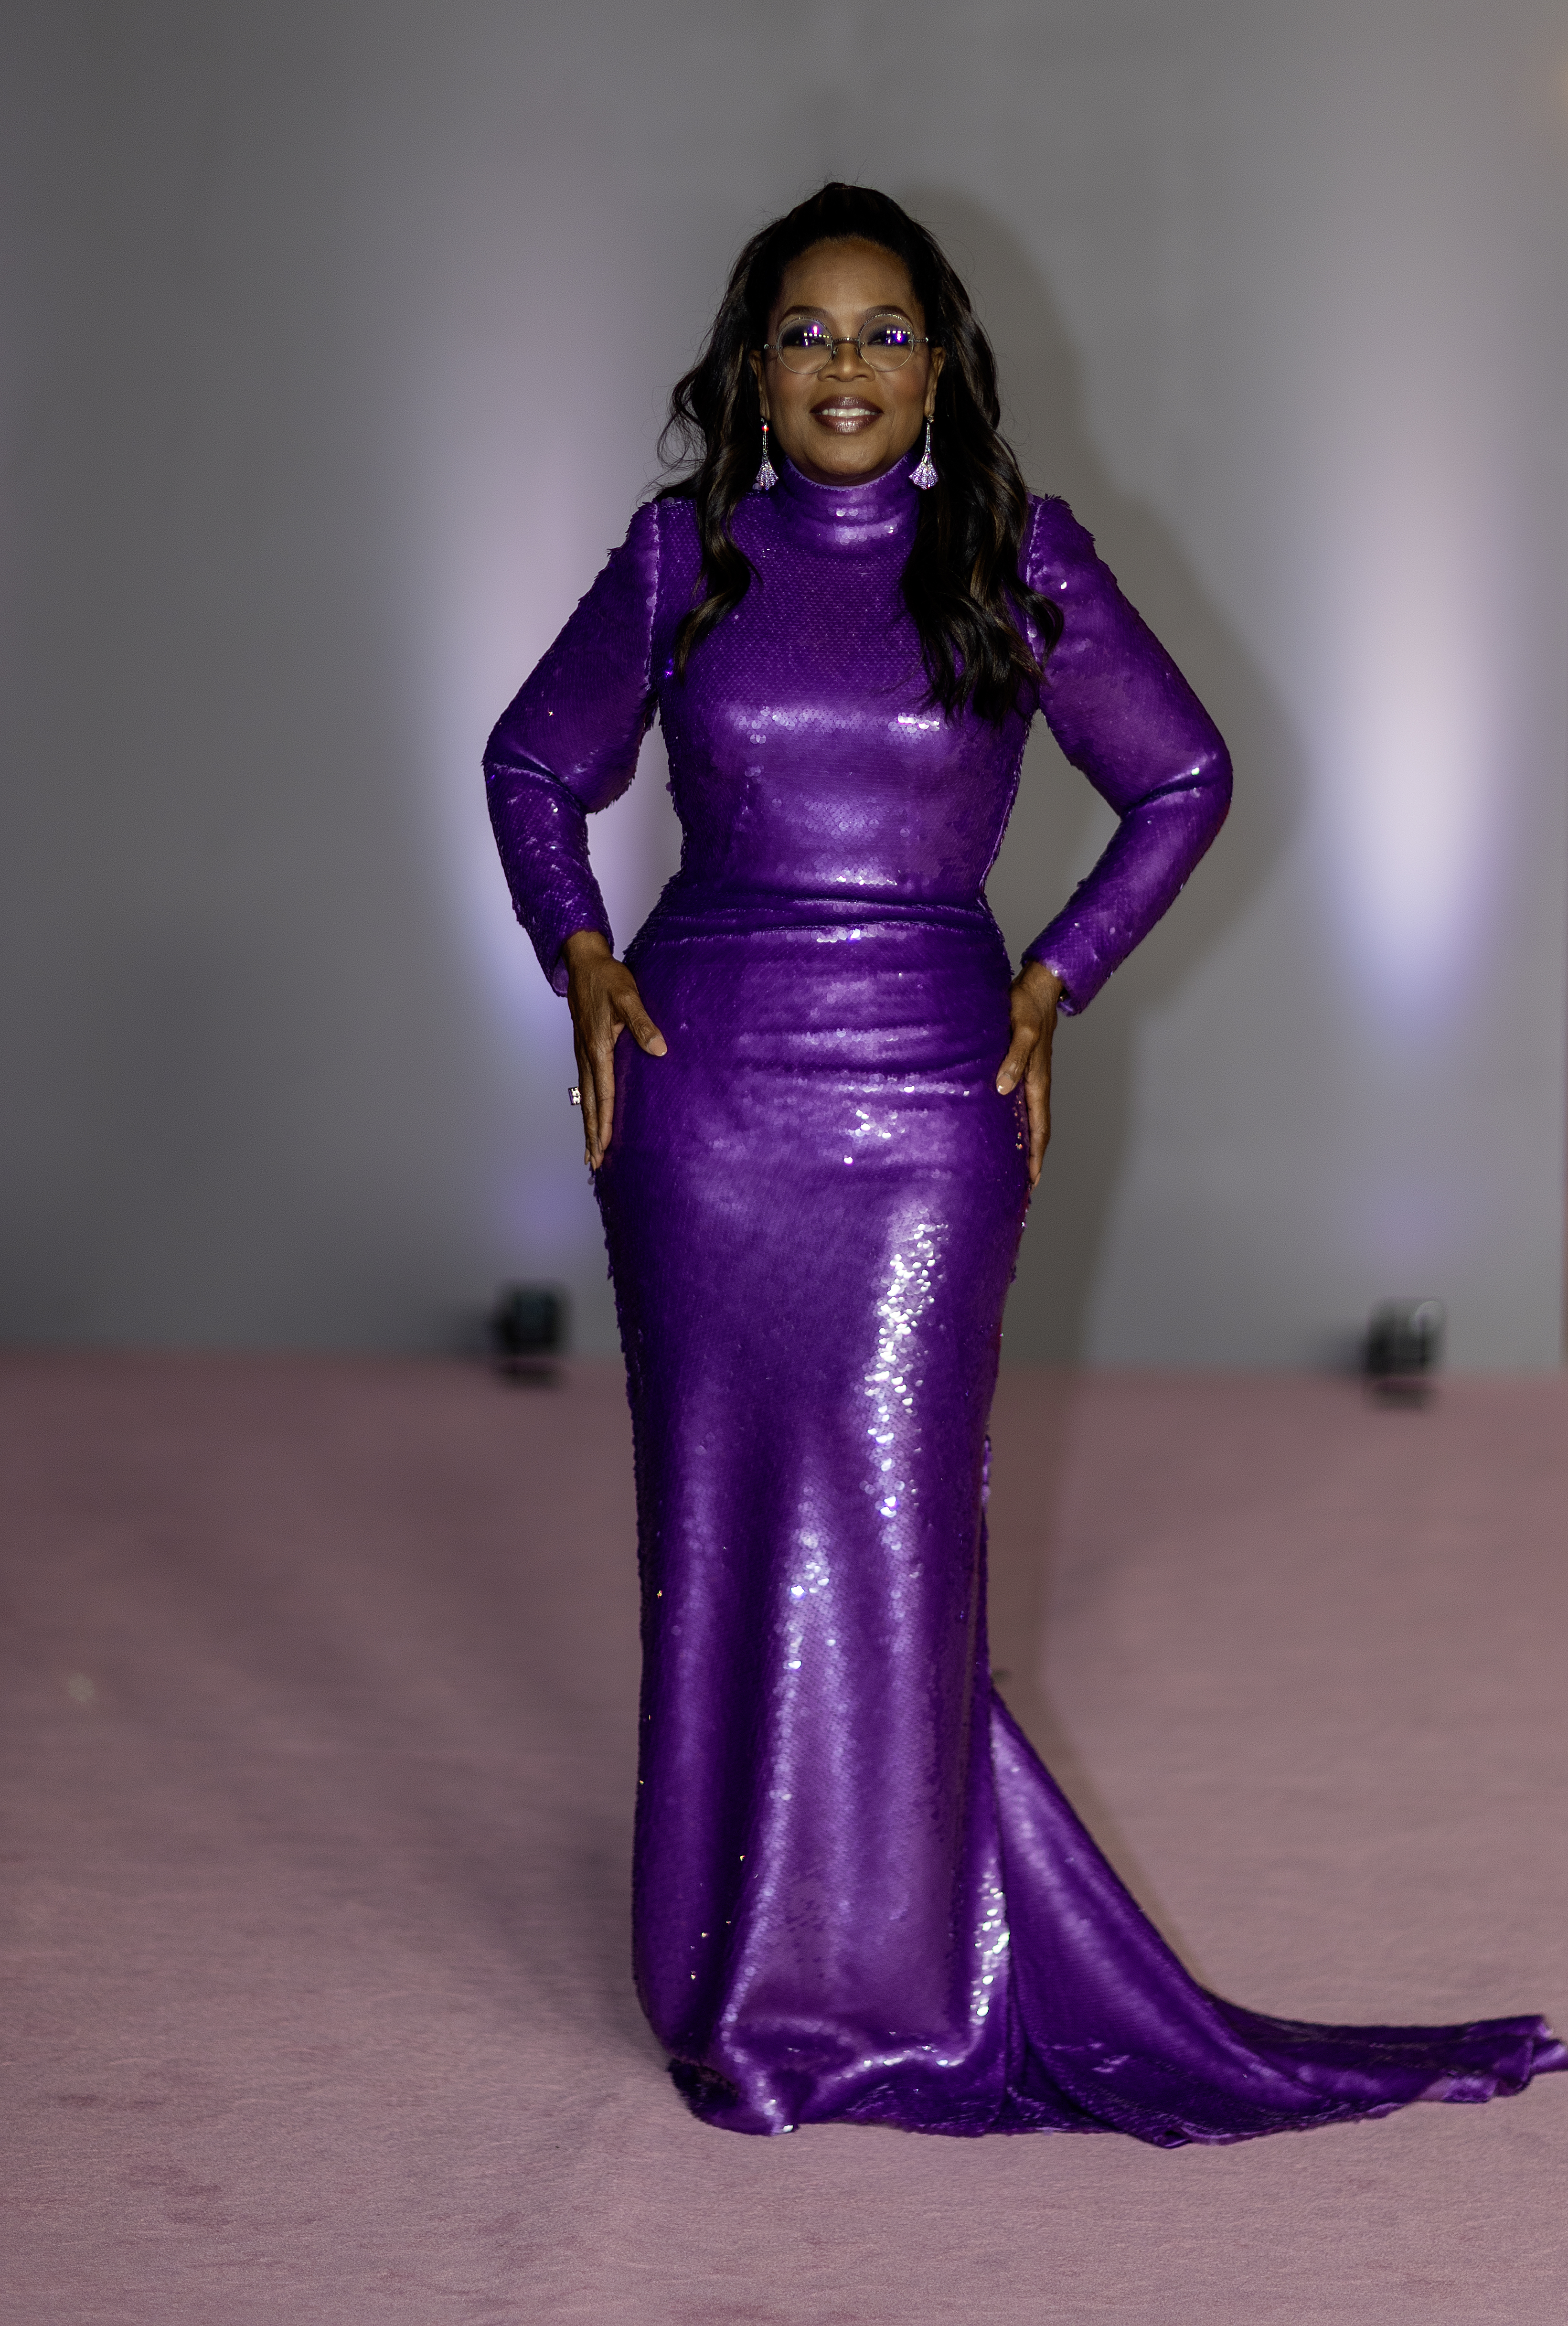 Oprah Winfrey attends the 3rd Annual Academy Museum Gala at Academy Museum of Motion Pictures on December 3, 2023 in Los Angeles, California. | Source: Getty Images